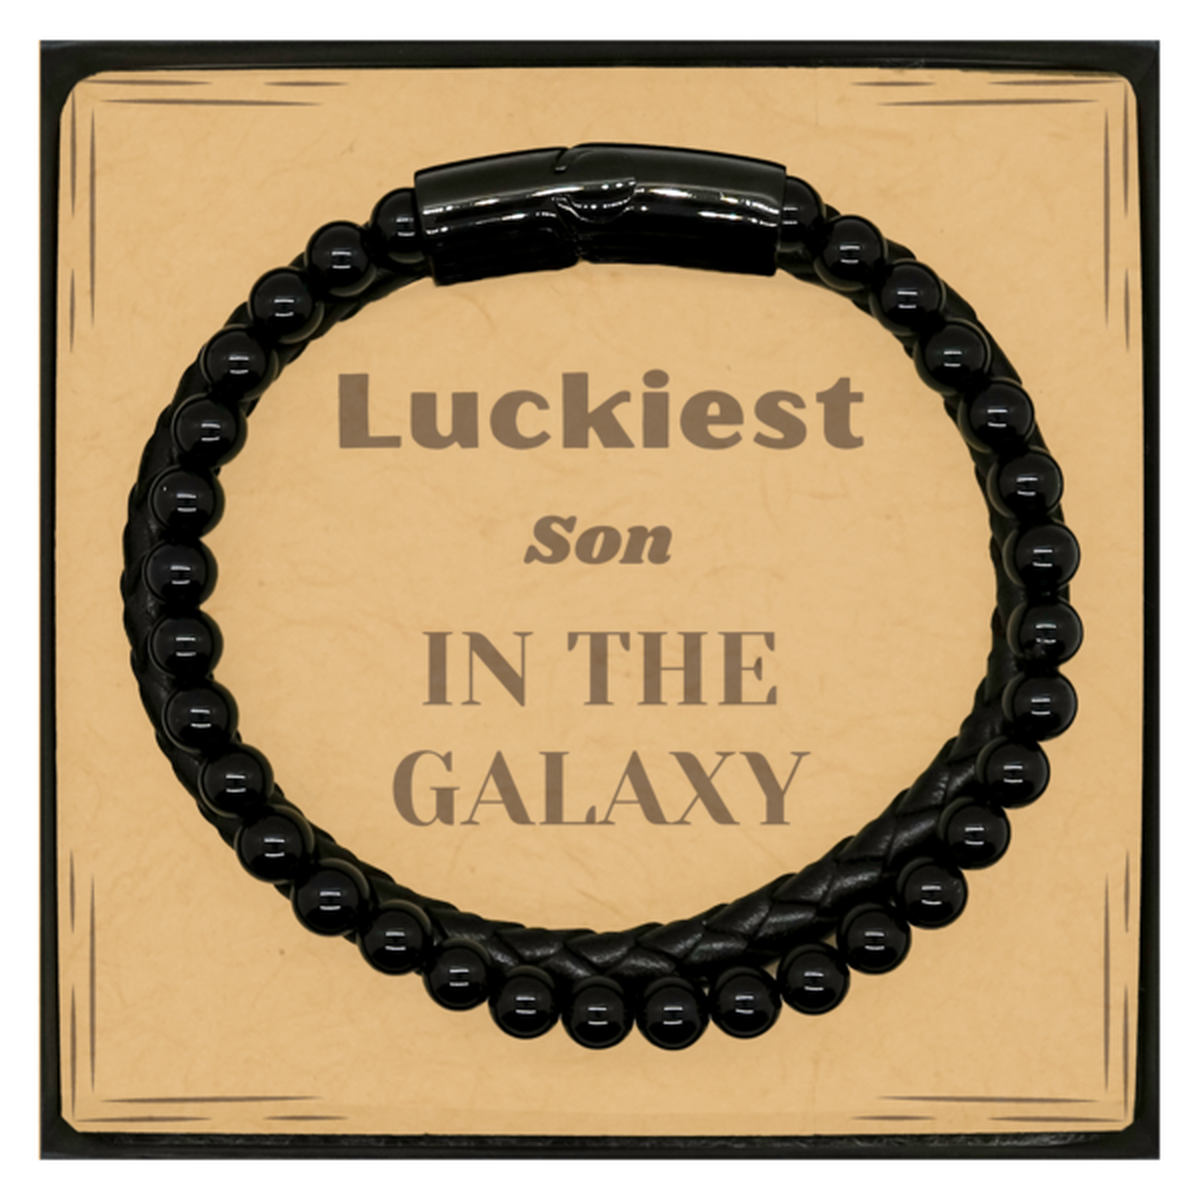 Luckiest Son in the Galaxy, To My Son Message Card Gifts, Christmas Son Stone Leather Bracelets Gifts, X-mas Birthday Unique Gifts For Son Men Women